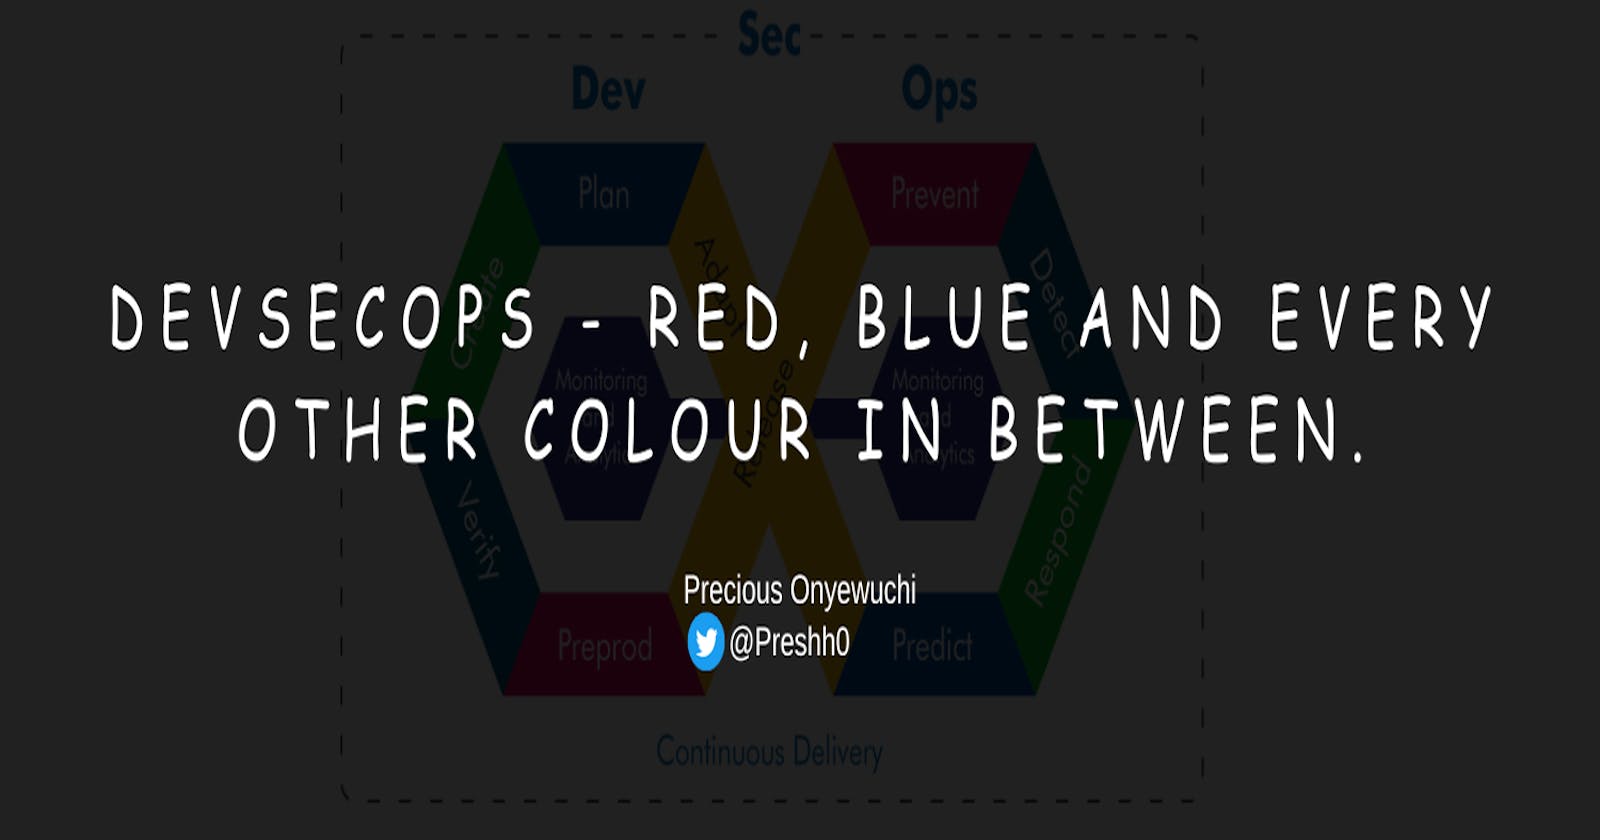 DevSecOps - Red, Blue and Every Other Colour in Between.